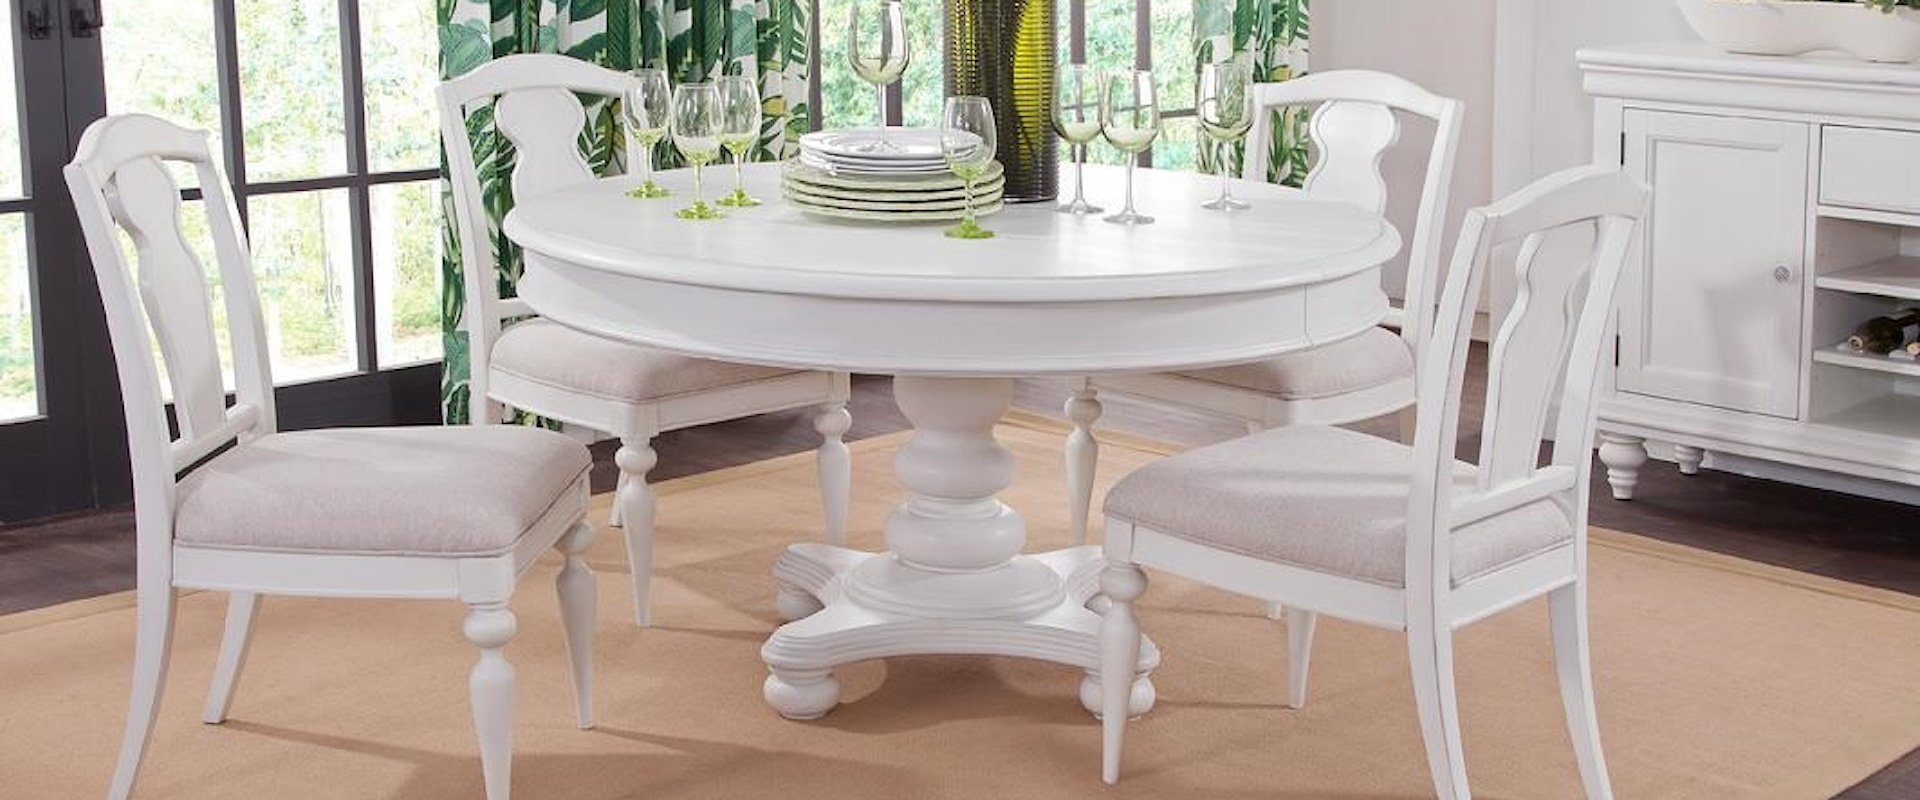 Oval Pedestal Table and 4 Slatback Side Chairs